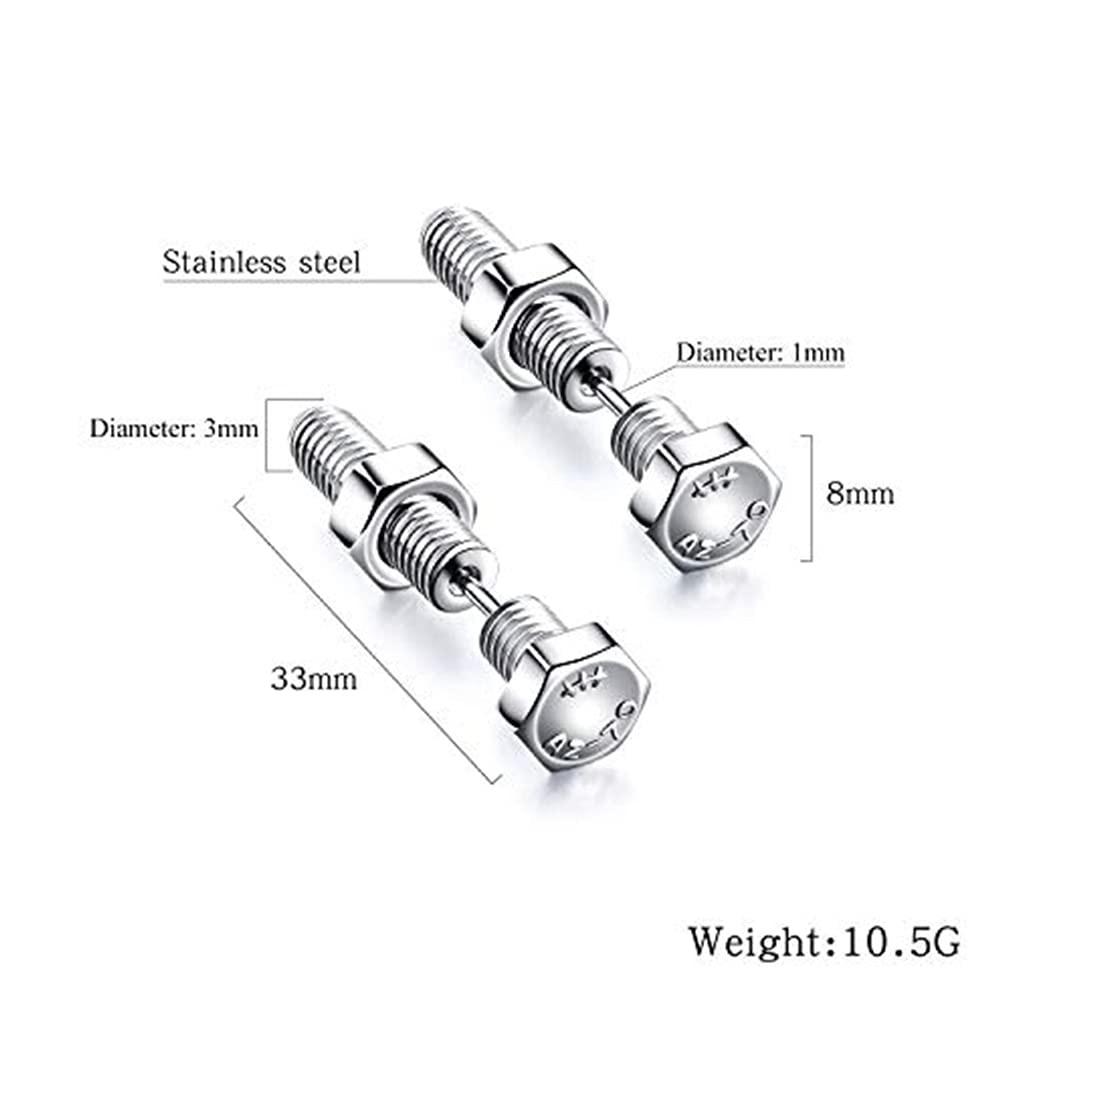 Yellow Chimes Elegant Latest Fashion Stainless Steel Screw Design Silver Stud Earrings for Men and Women, Medium (YCFJER-418SCRW-SL)